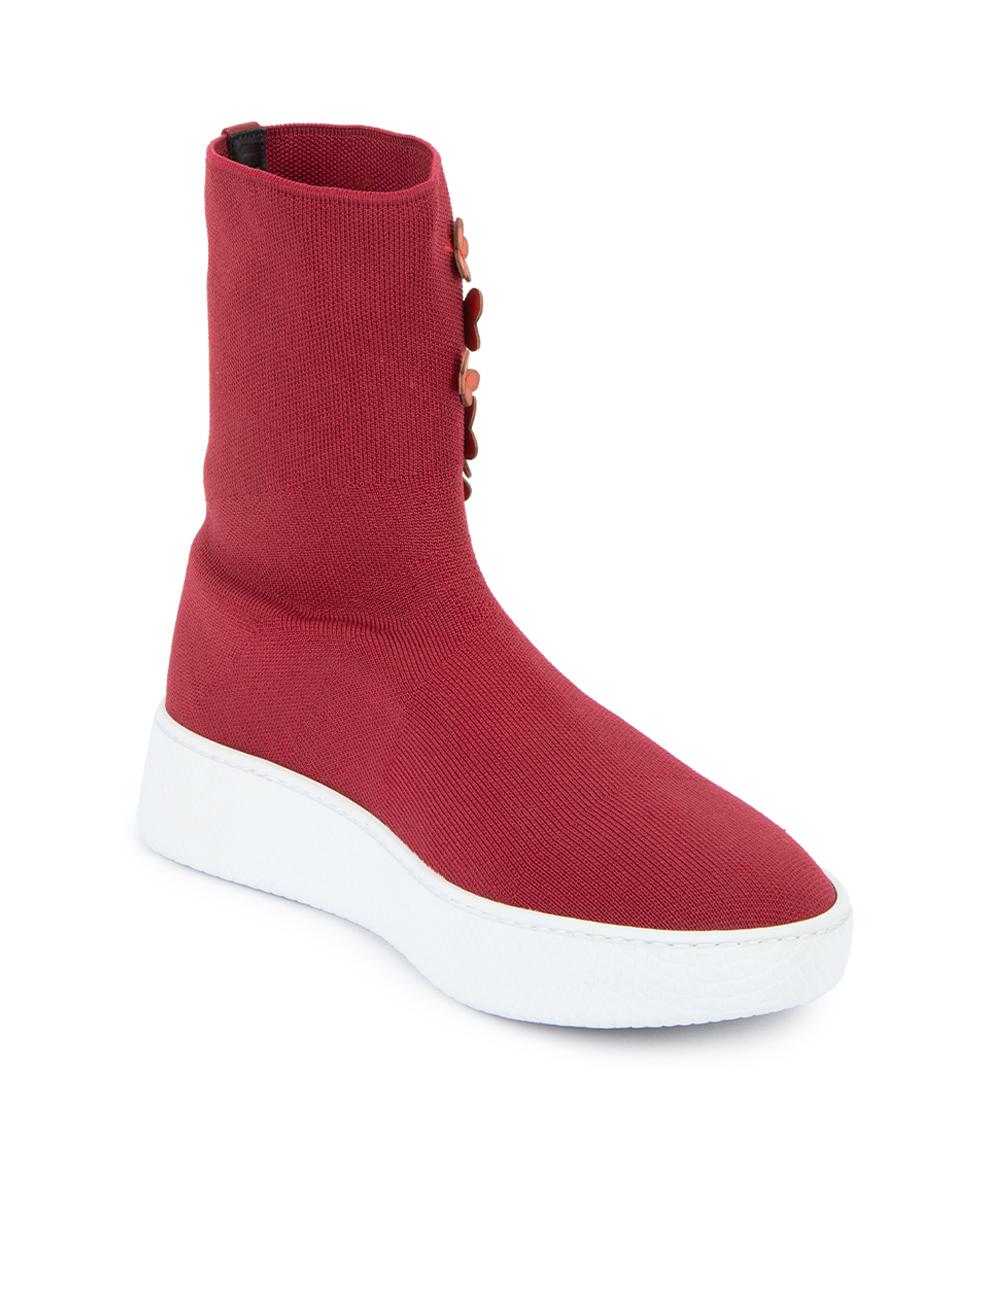 CONDITION is Never Worn. No visible wear to boots is evident on this used Bottega Veneta designer resale item. This item comes with original shoebox and dust bag.  Details  Burgundy Cloth textile High top trainers Round toe Flatform white rubber